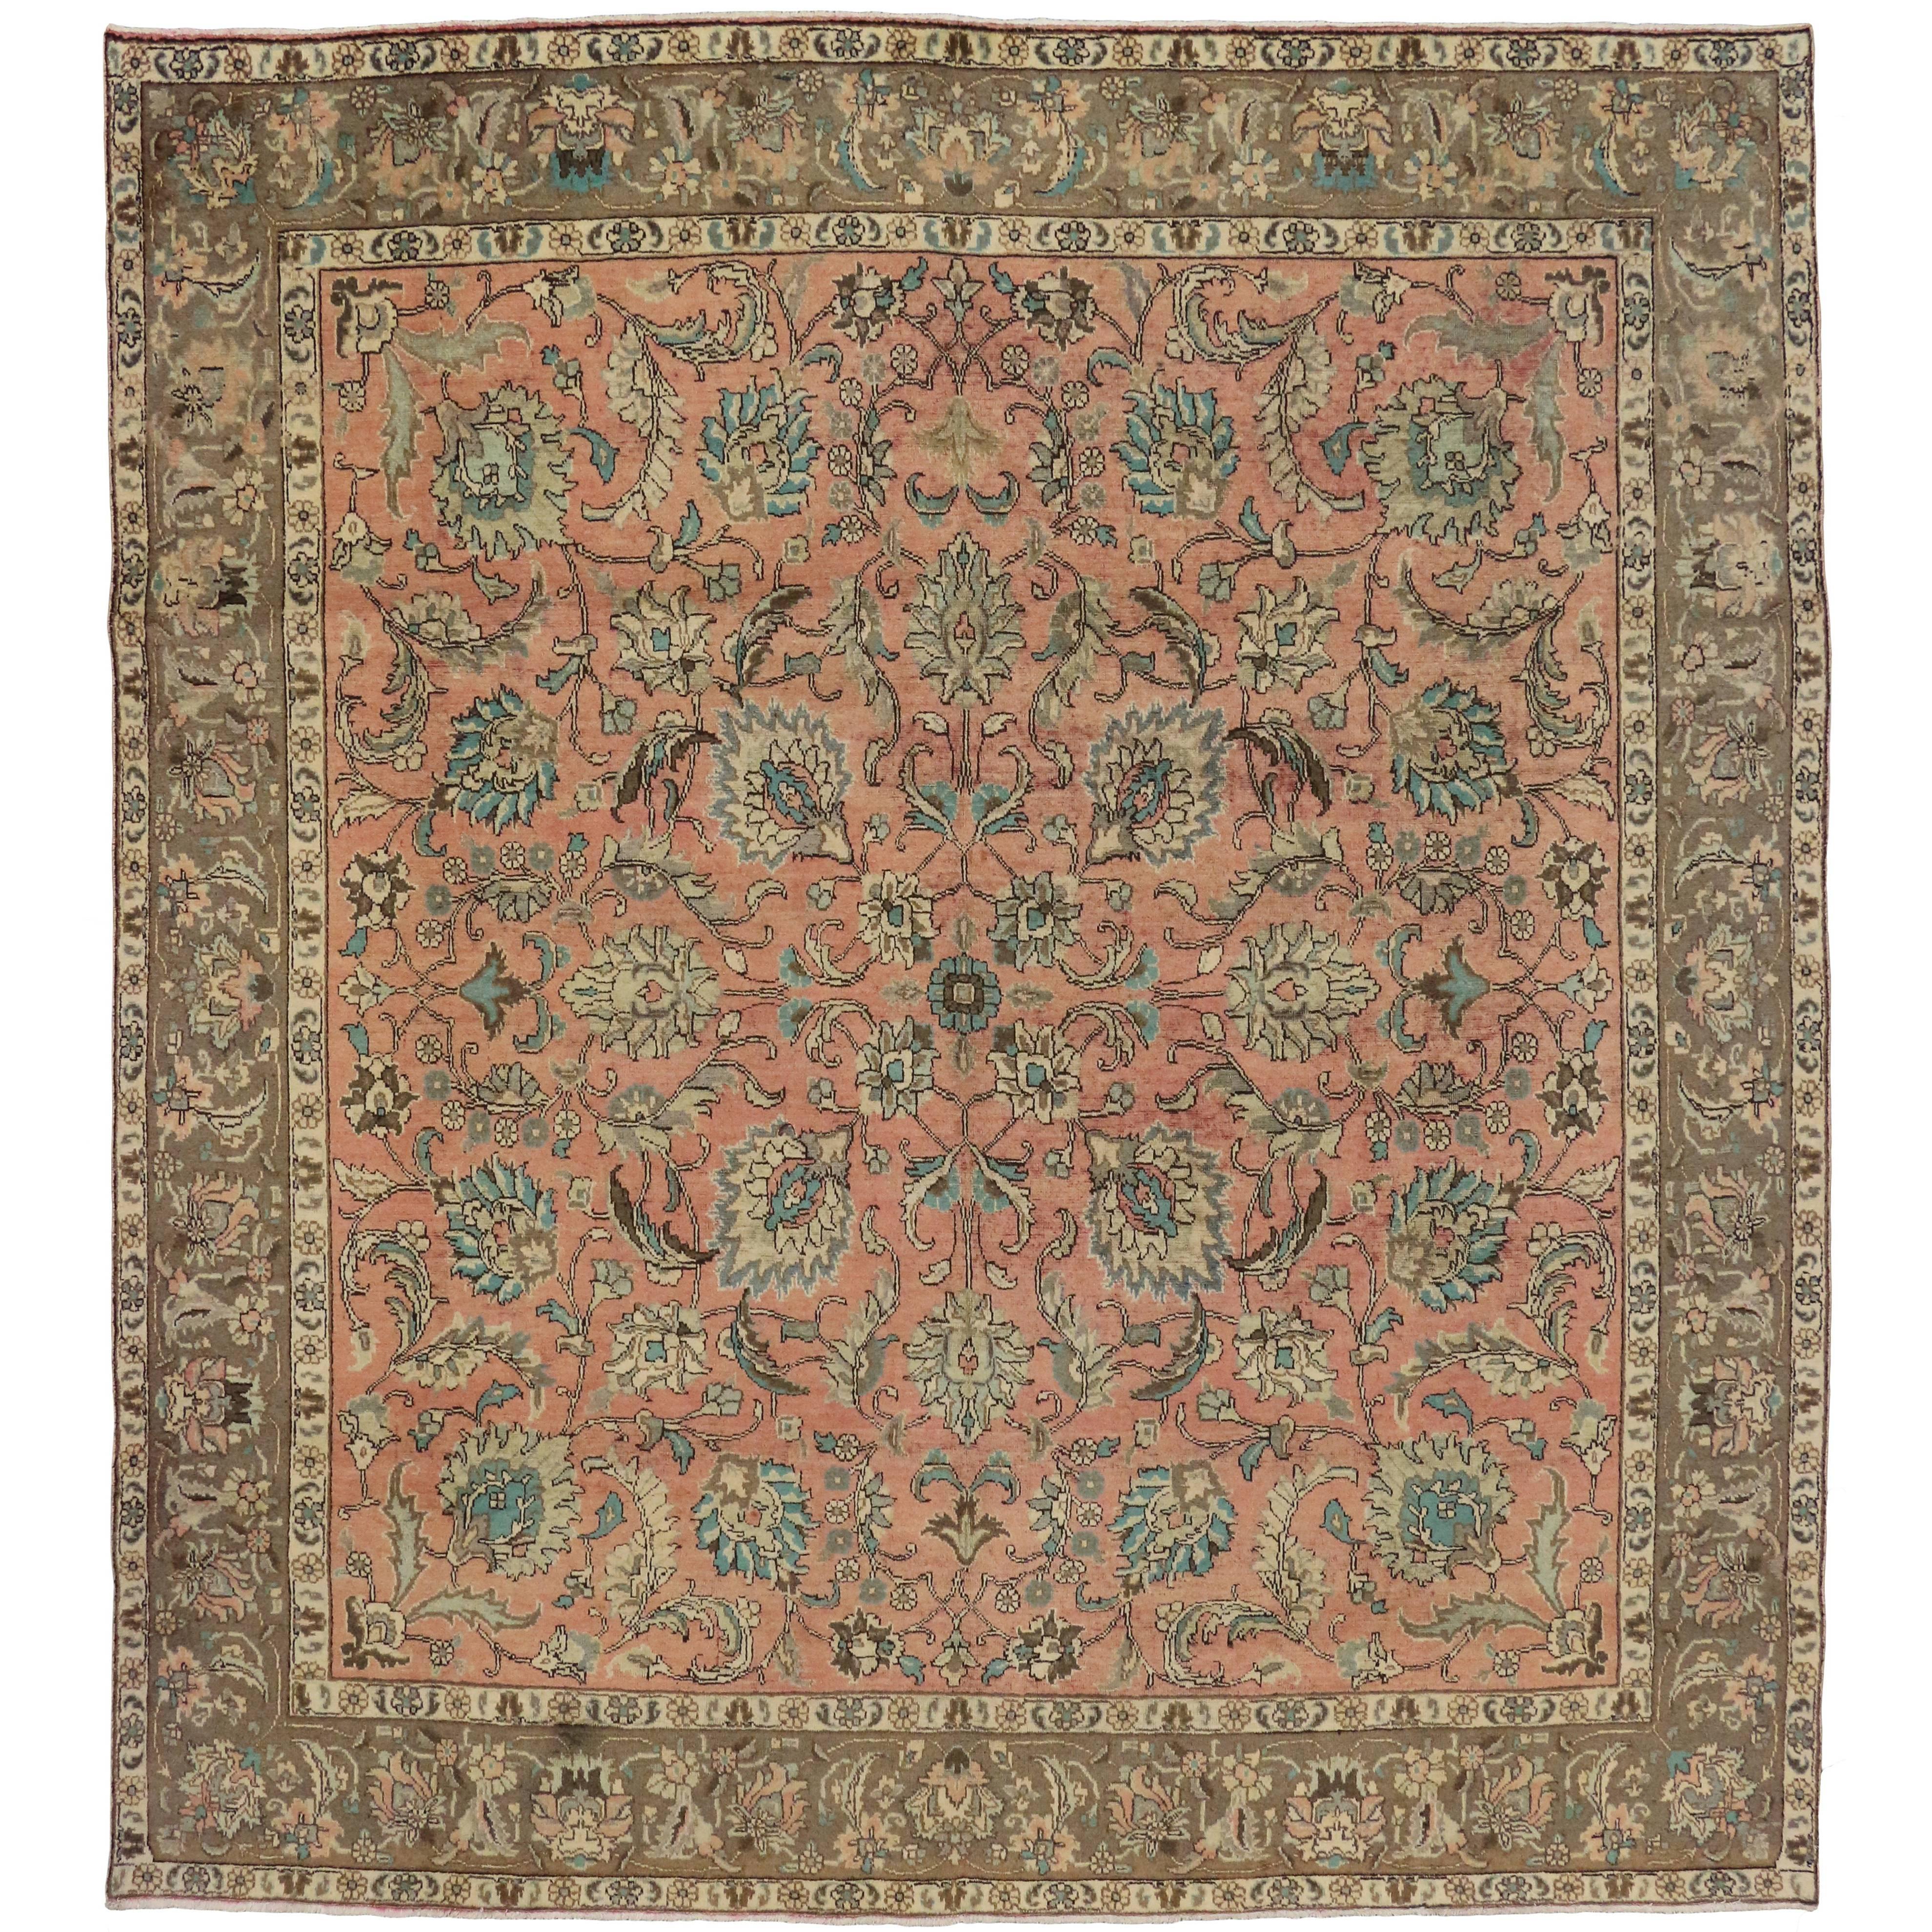 Vintage Persian Tabriz Rug with Traditional Style in Light Colors, Square Rug